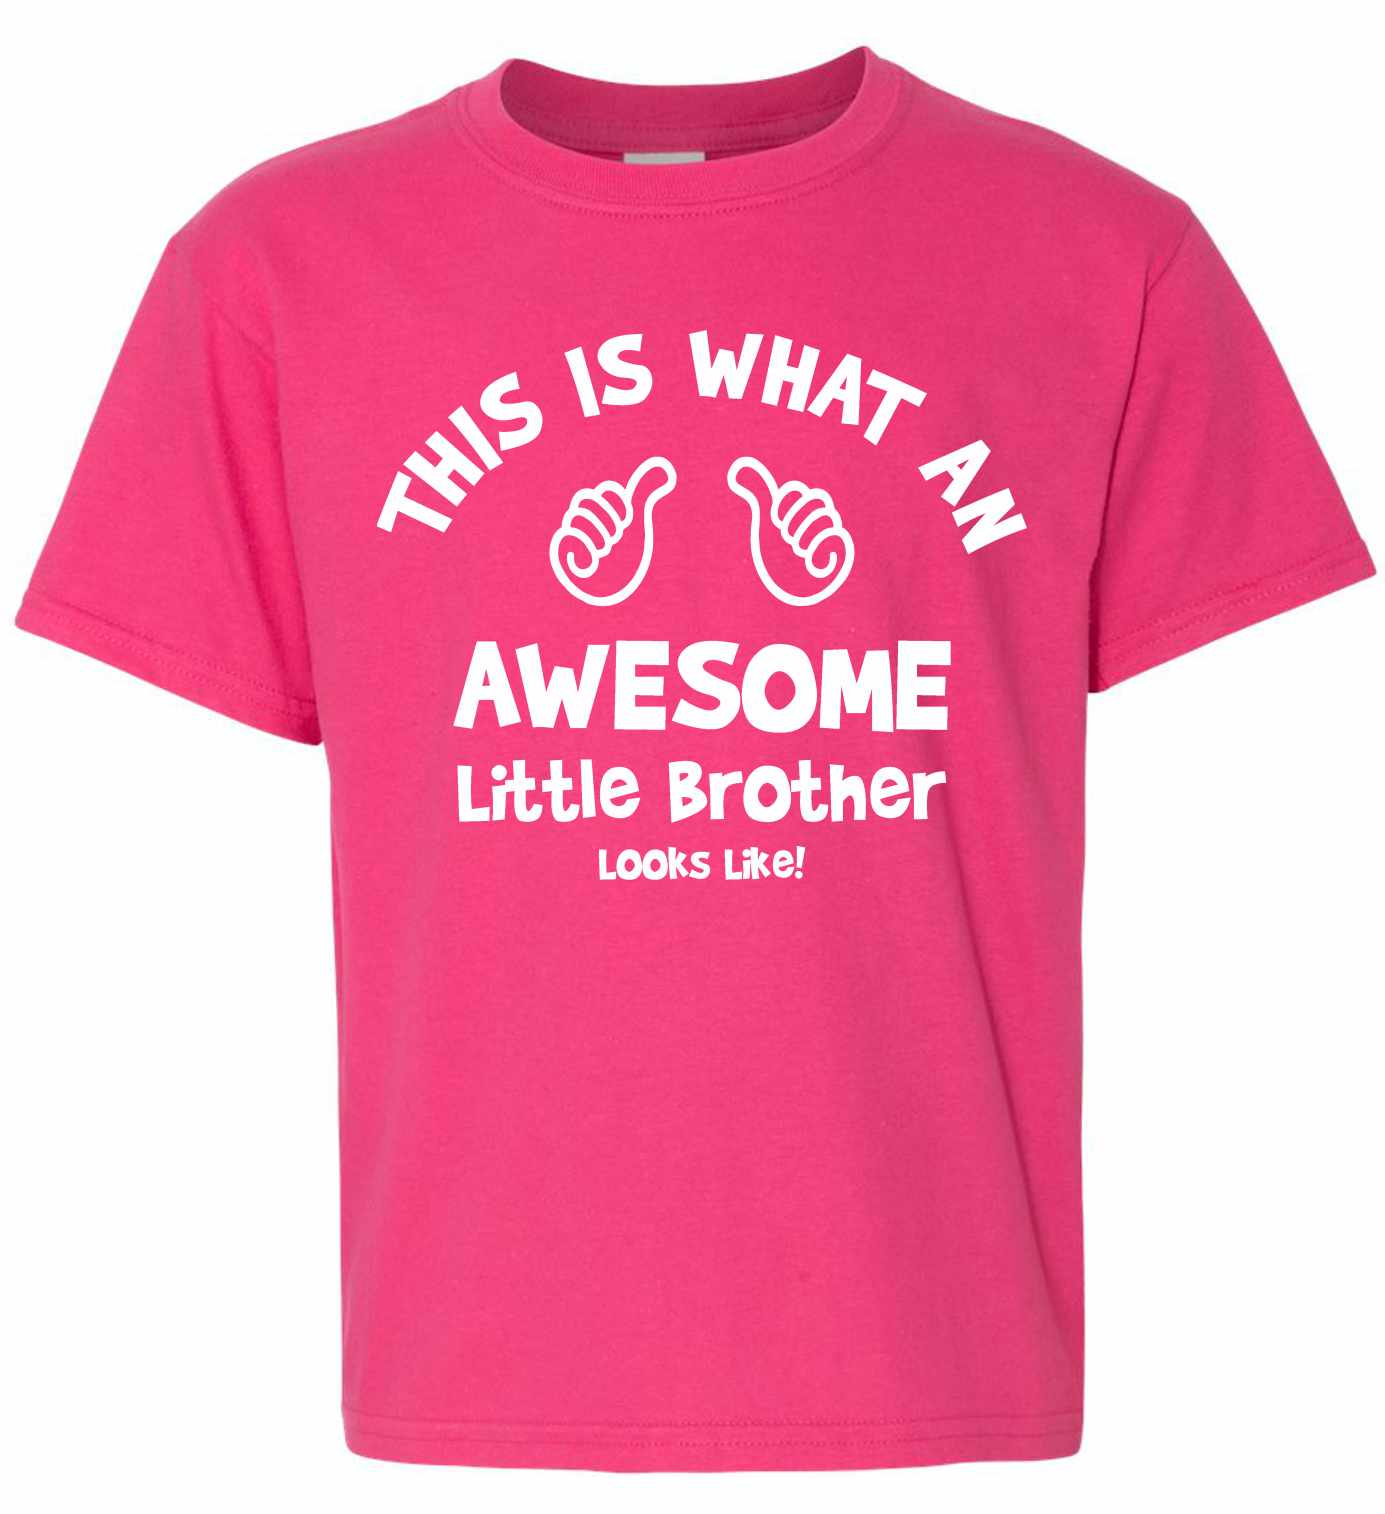 This is What an AWESOME LITTLE BROTHER Looks Like on Kids T-Shirt (#1036-201)